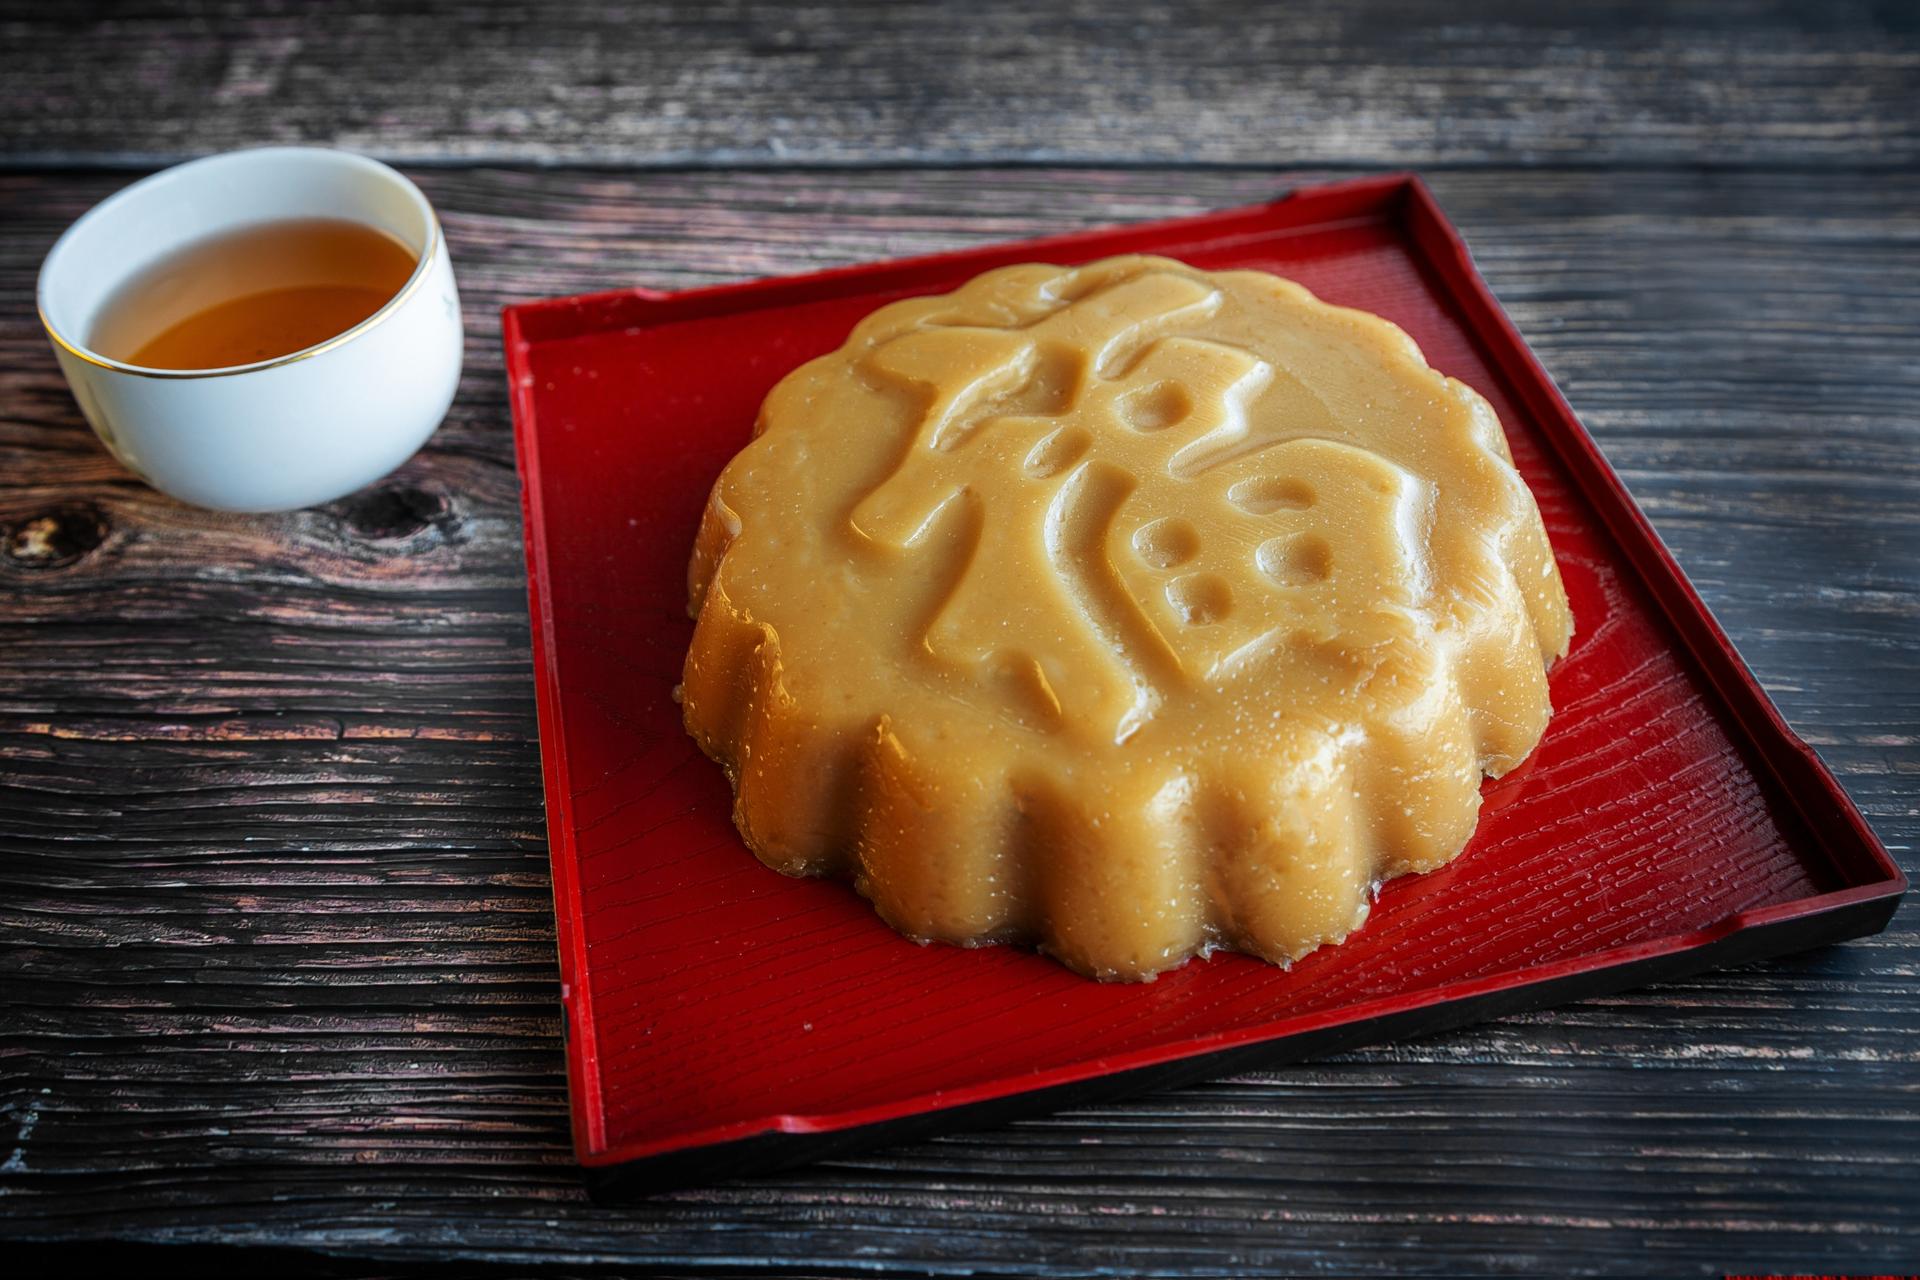 A traditional nian gao or "new year cake", served with tea